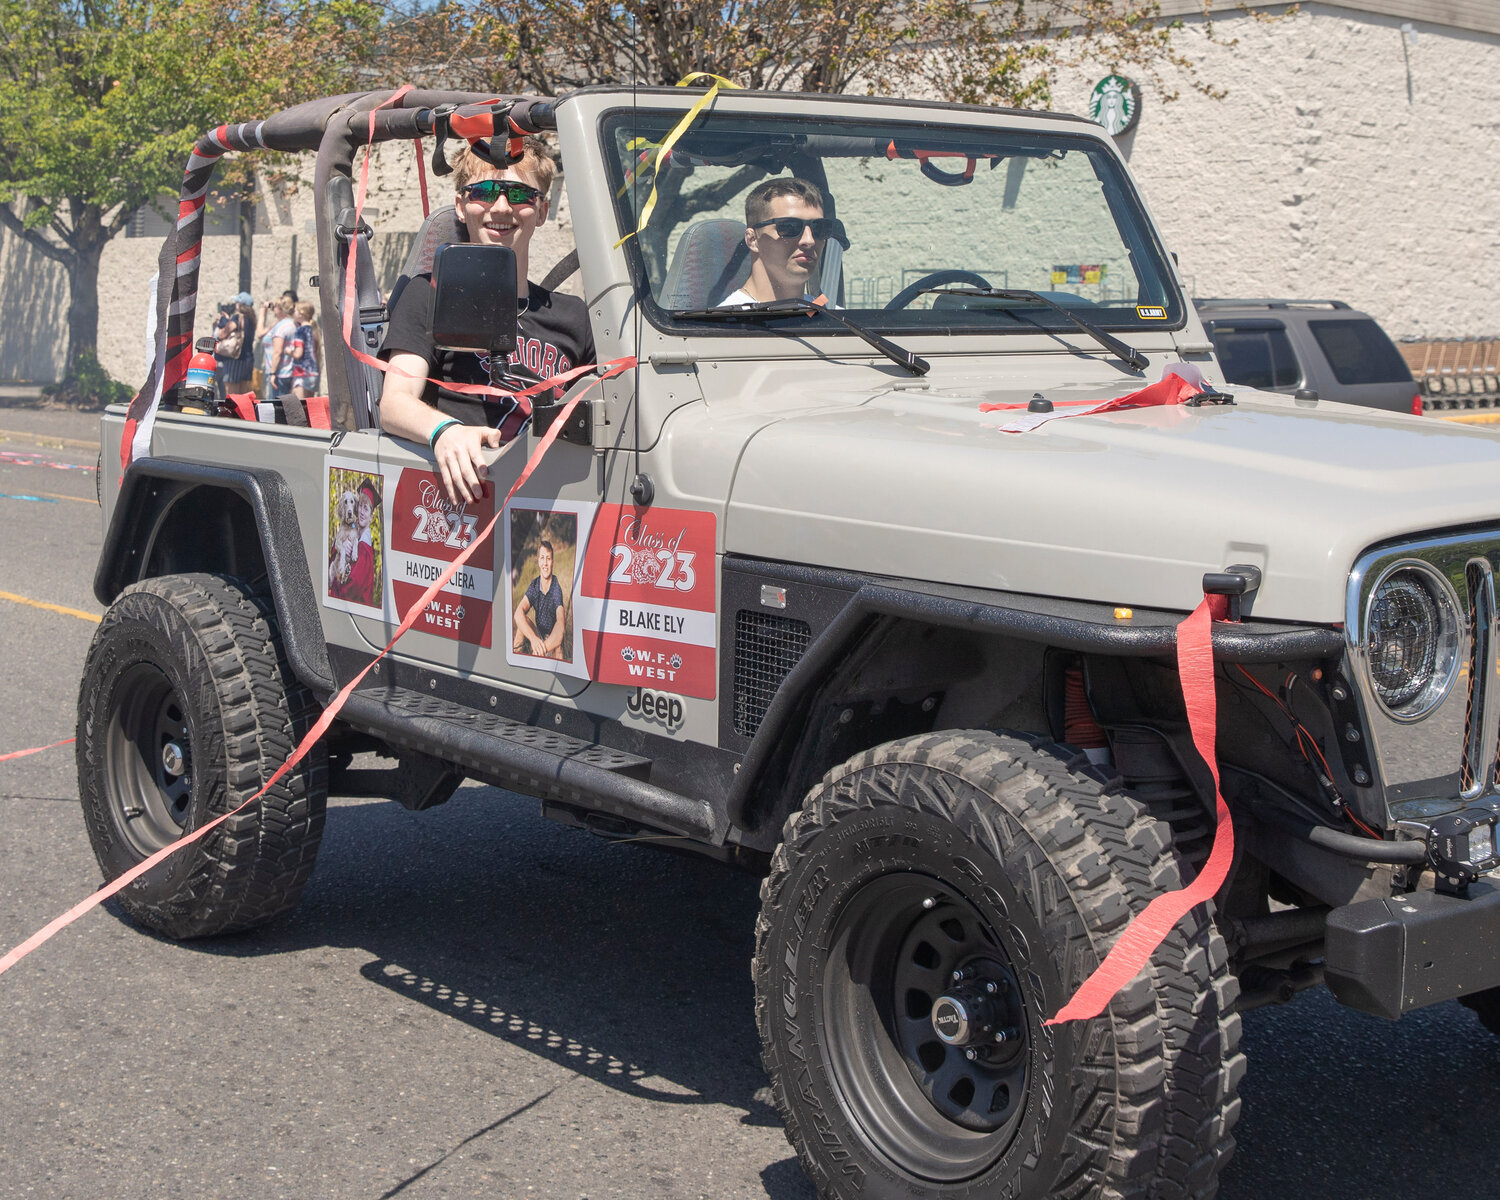 W.F. West High School seniors Hayden Sciera and Blake Ely ride in a Jeep during a parade honoring future graduates in Chehalis on Sunday, June 4.